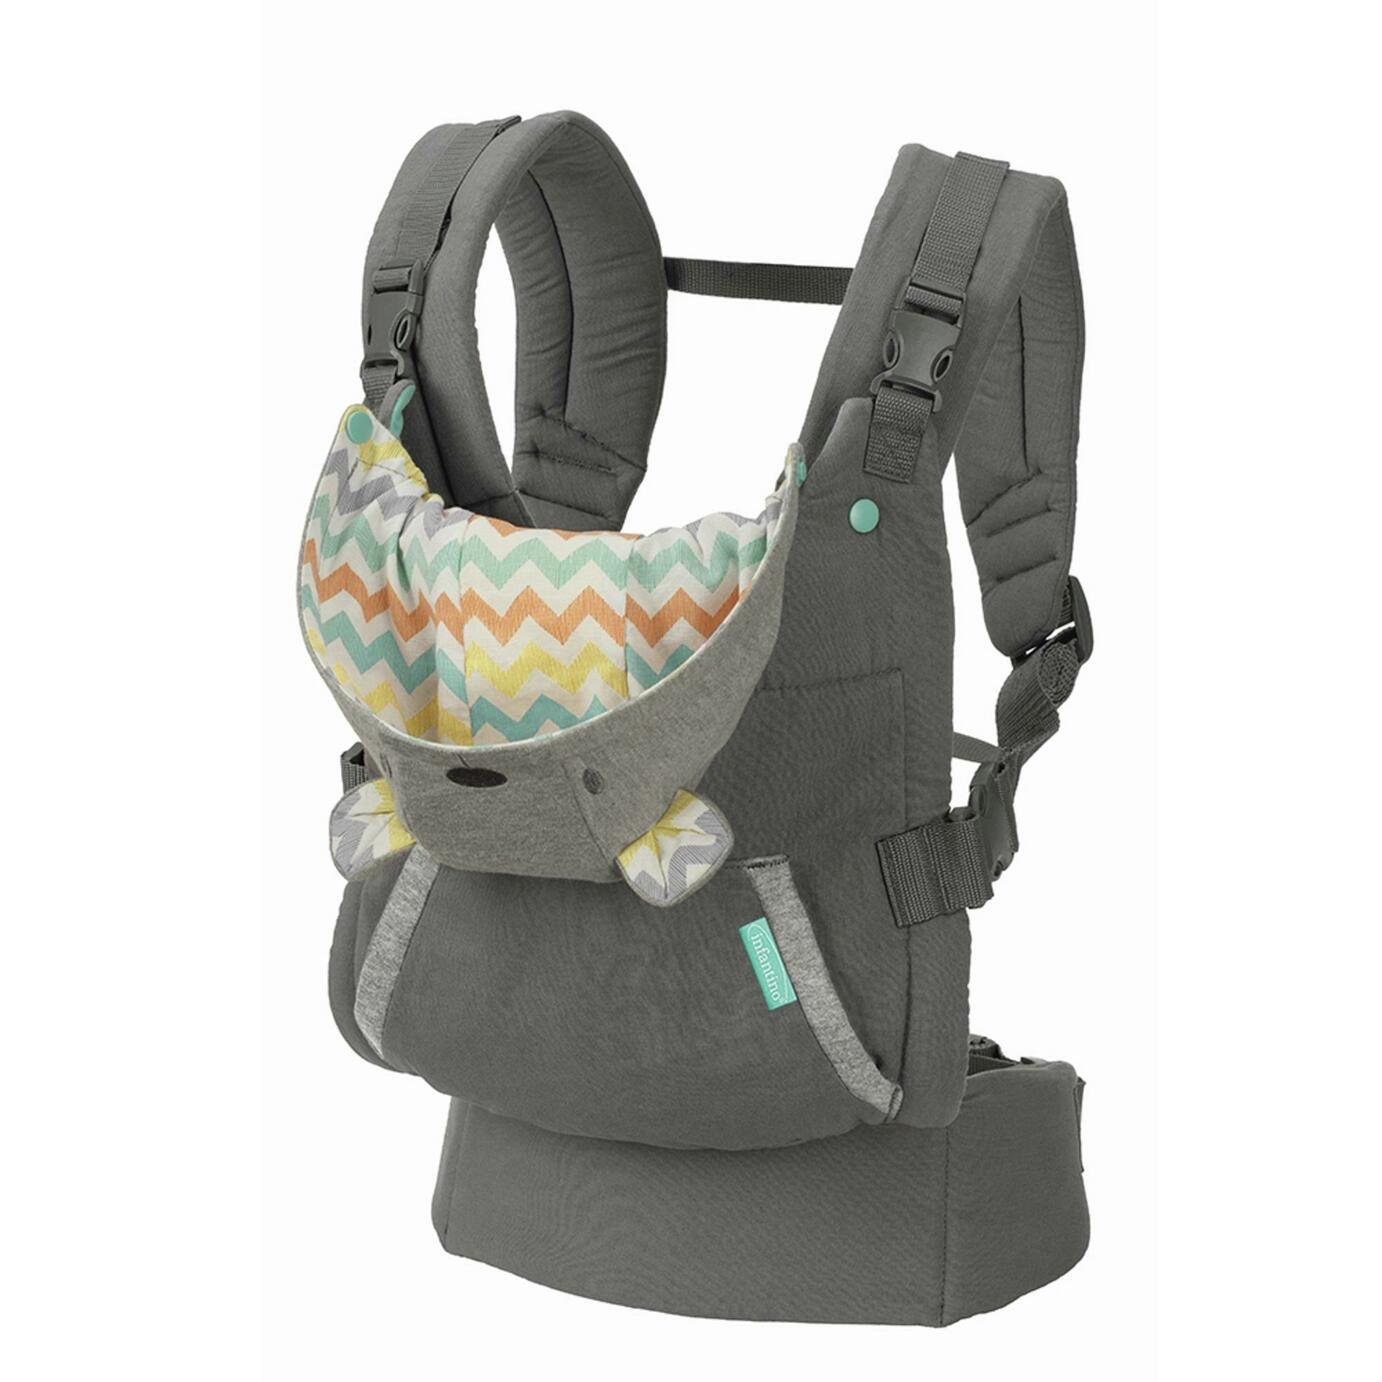 Infantino Cuddle Up Baby Carrier Review